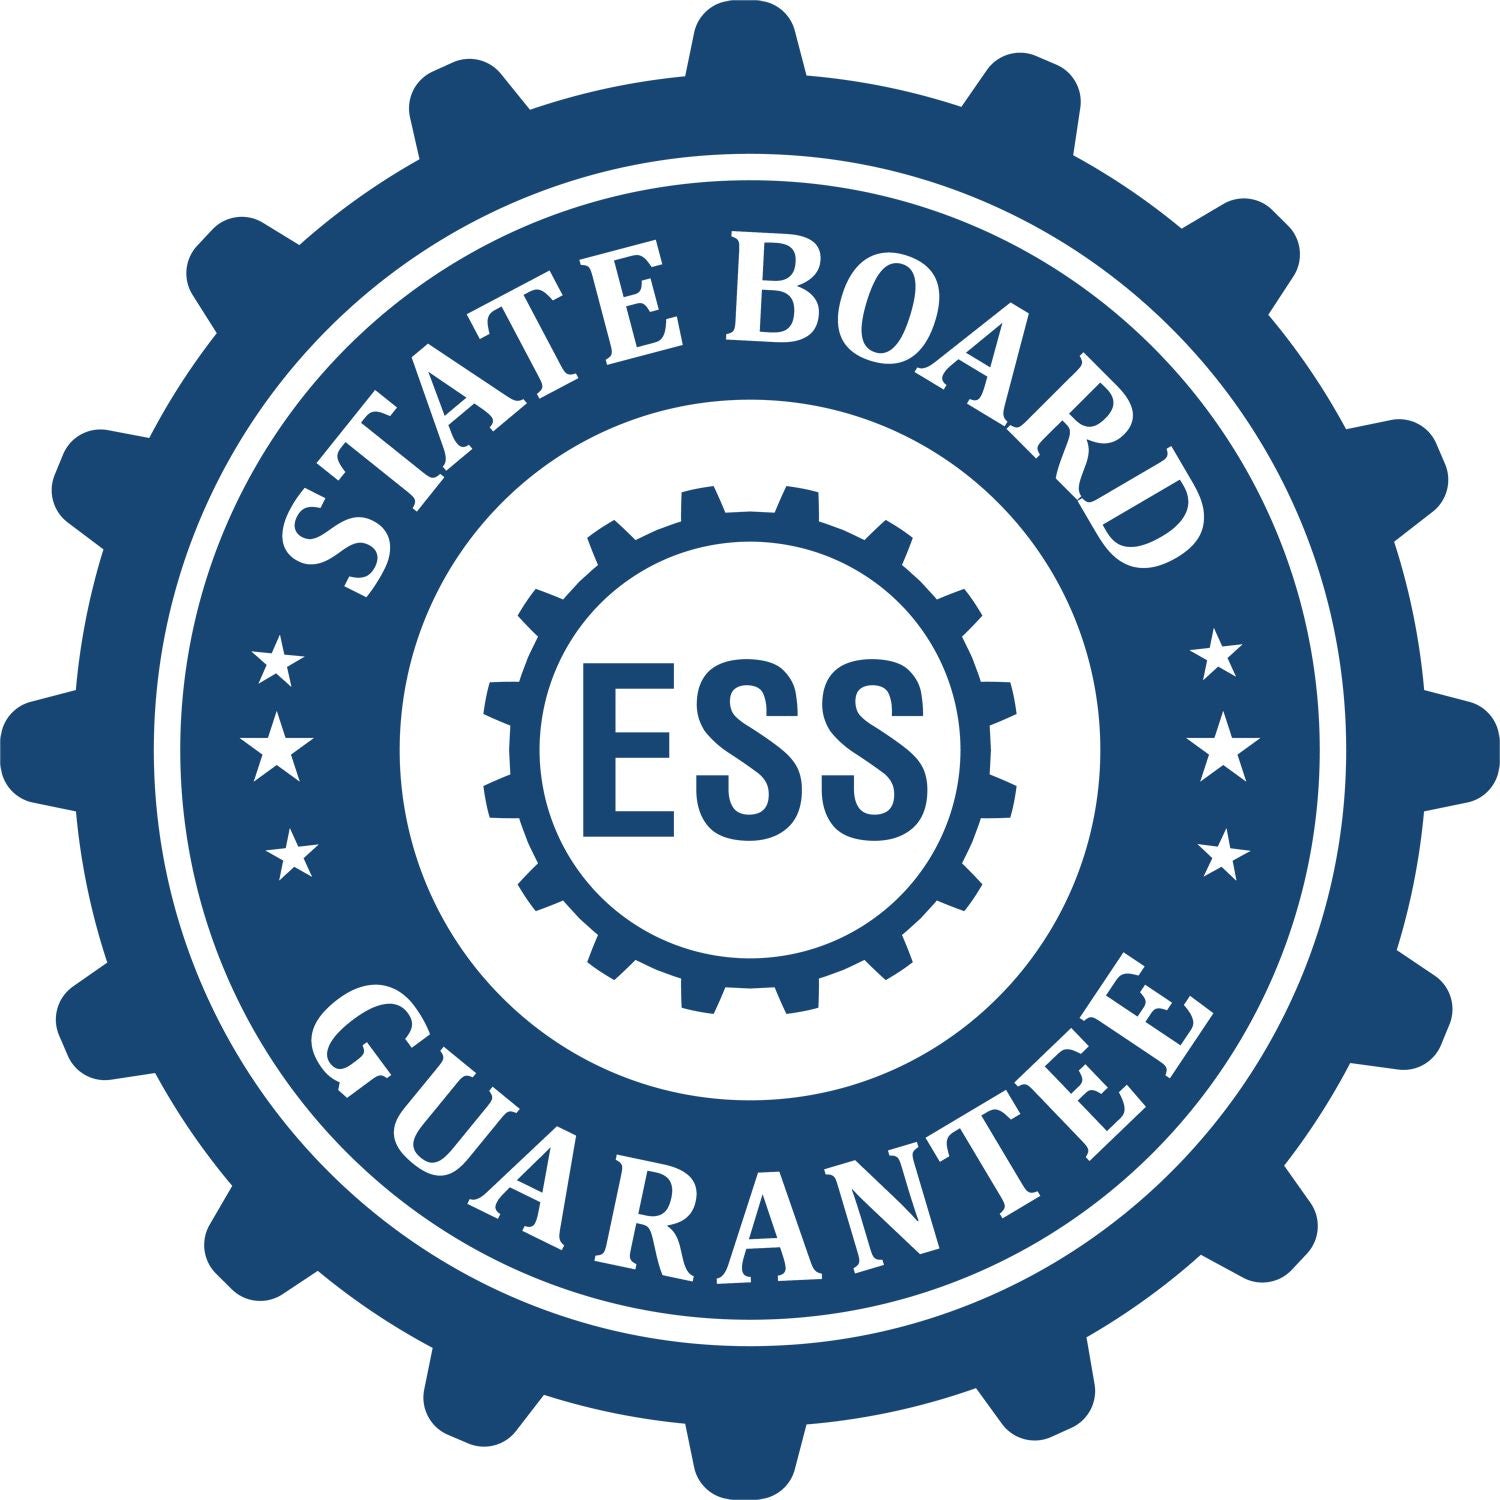 An emblem in a gear shape illustrating a state board guarantee for the State of Tennessee Handheld Landscape Architect Seal product.